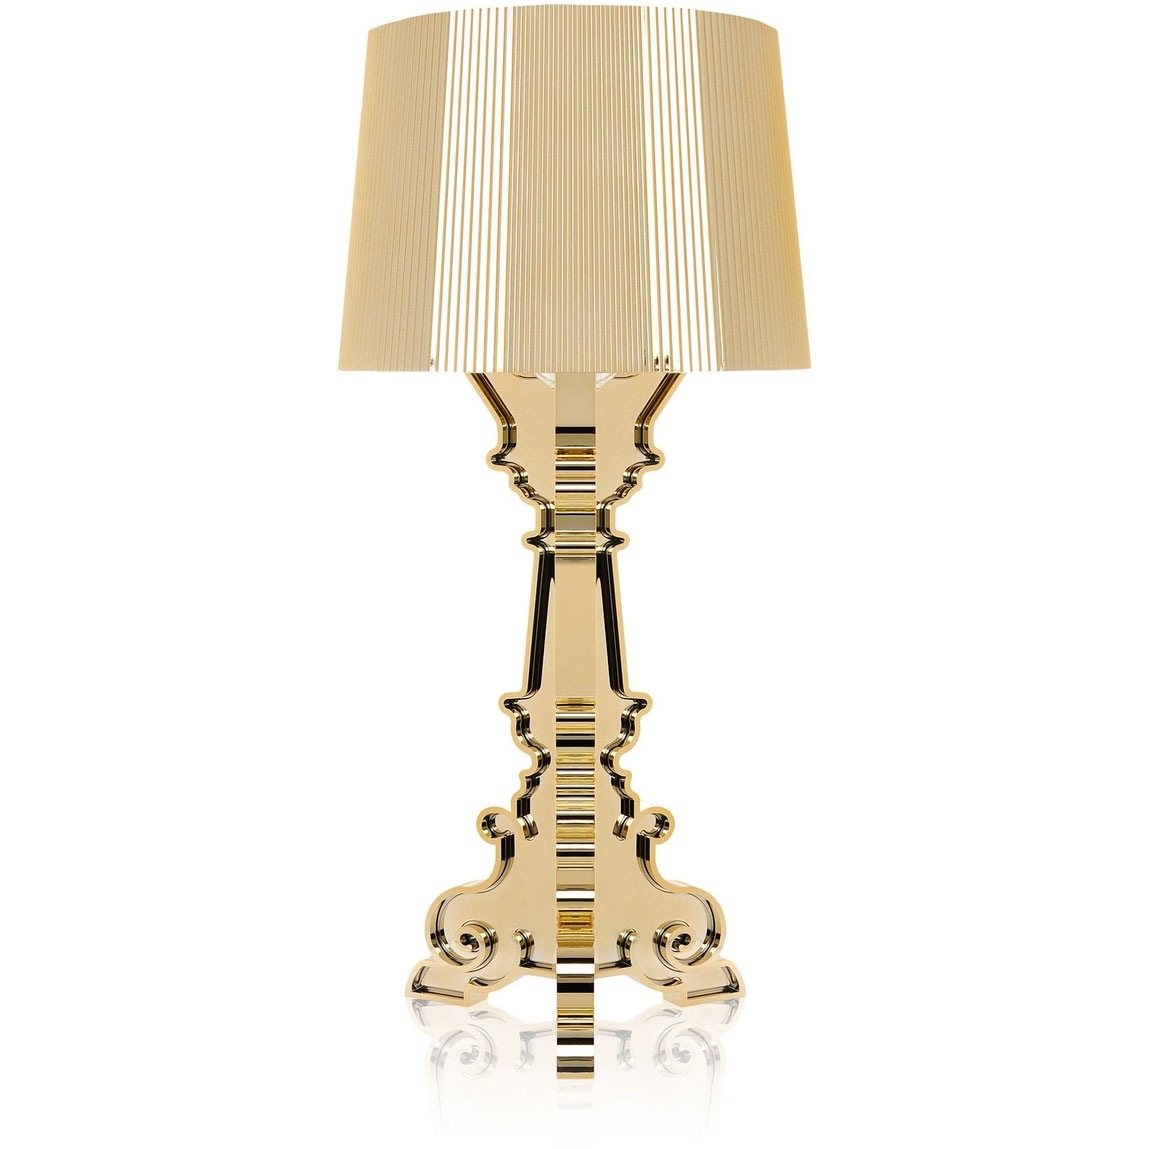 Bourgie Tischlampe, Gold